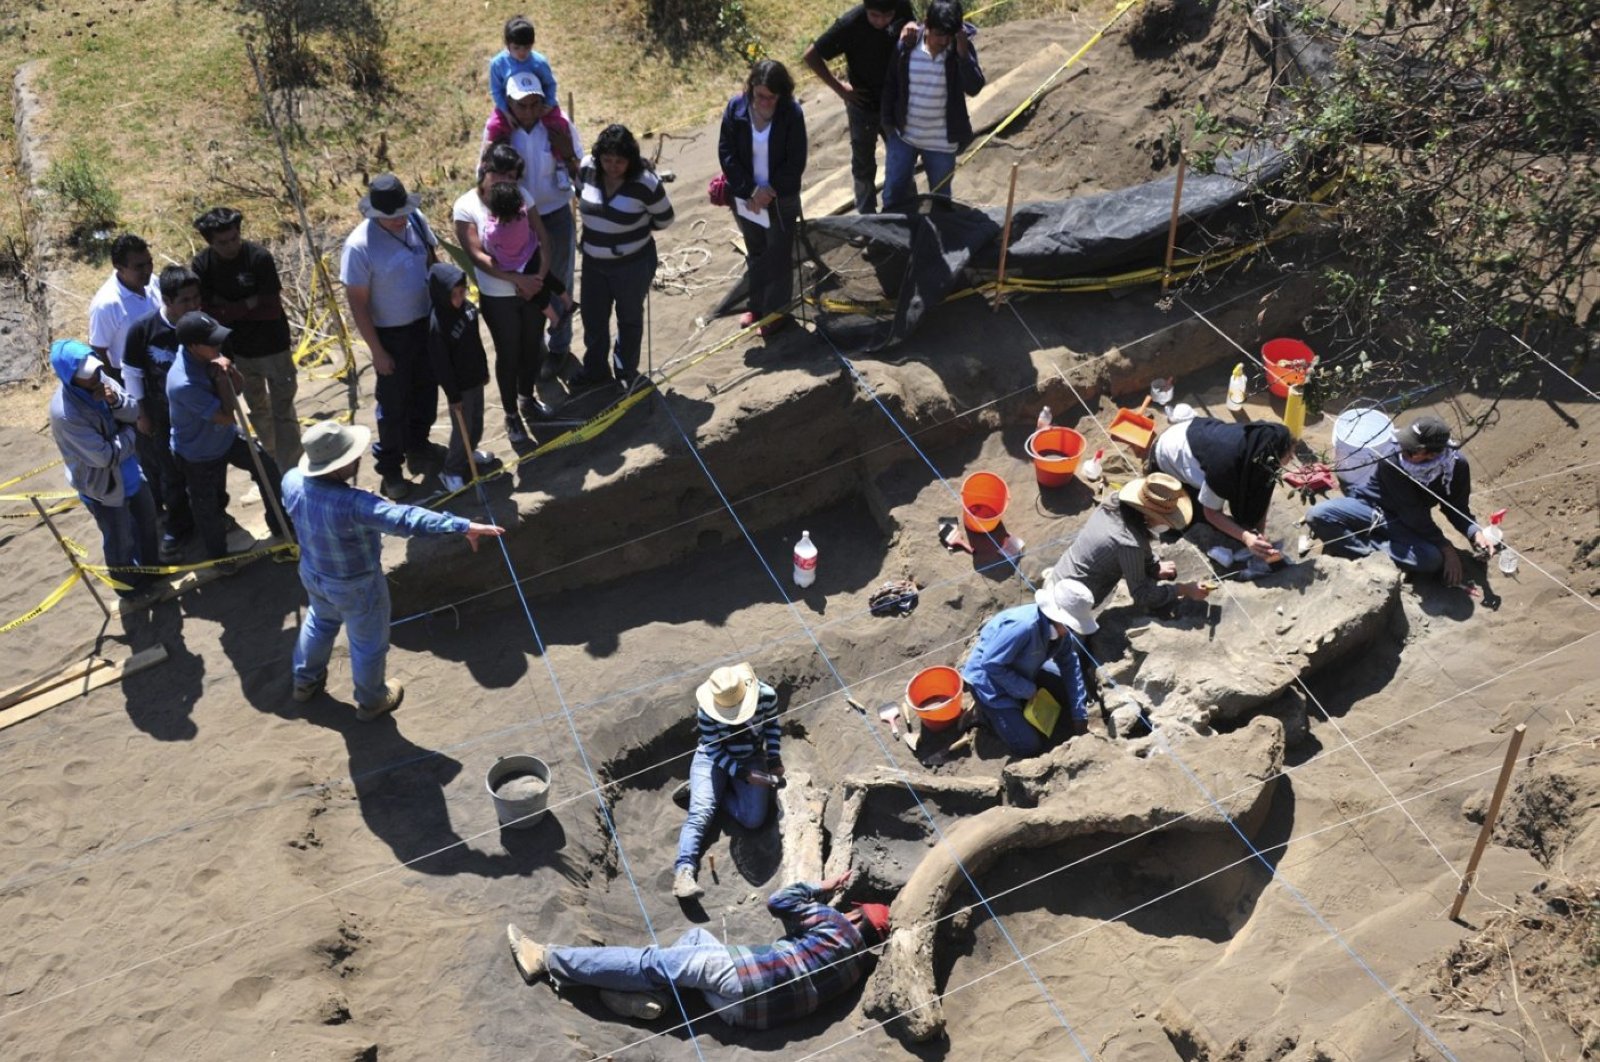 Archaeologists from Mexico's National Institute of Anthropology and History (INAH), work at the excavation of the buried remains of a Columbian mammoth in this handout photograph taken on April 4, 2013. (Reuters Photo)